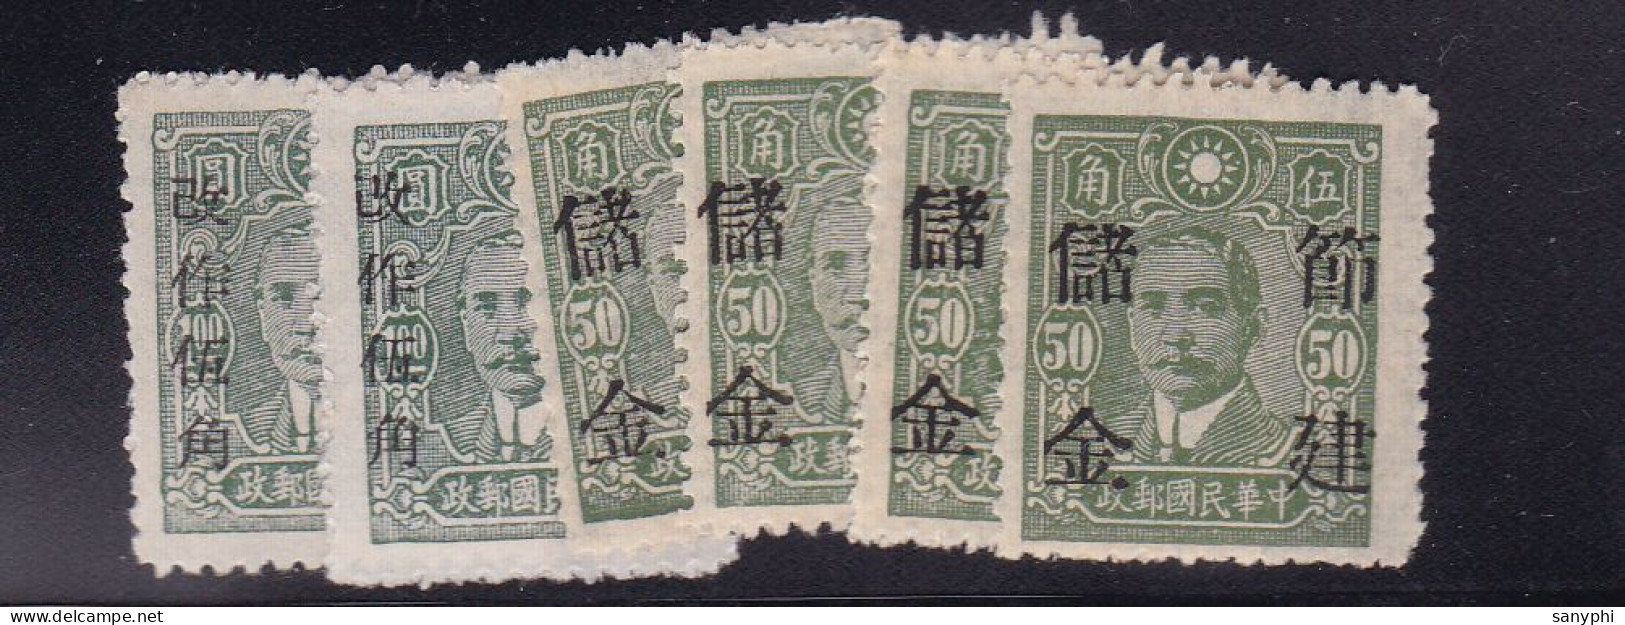 RO China Chine Various Dr Sun Ovpt "postal Savings Issue" ML - 1912-1949 République